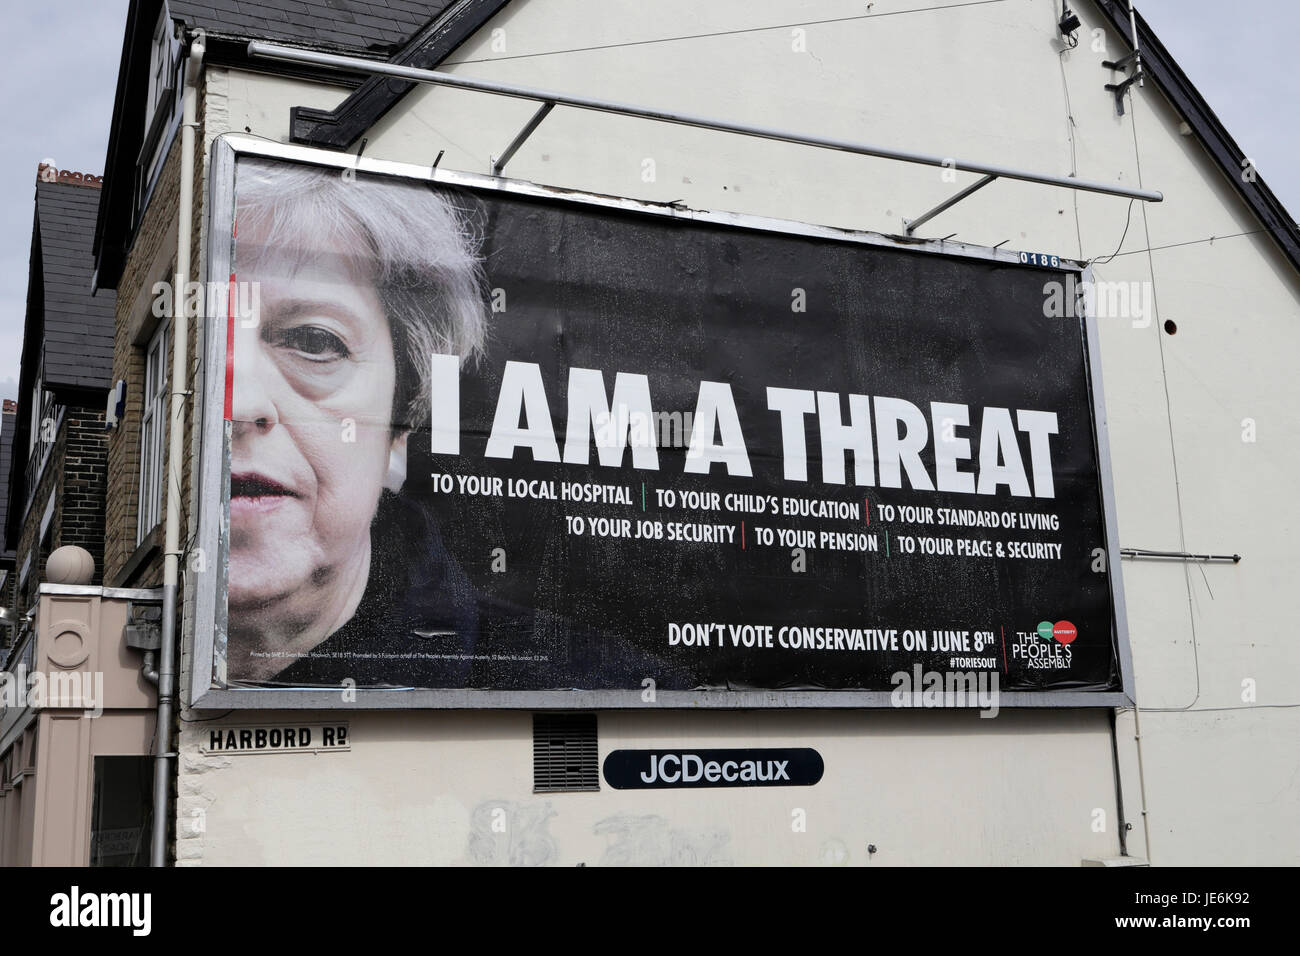 theresa-may-election-billboard-i-am-a-threat-political-election-campaign-JE6K92.jpg